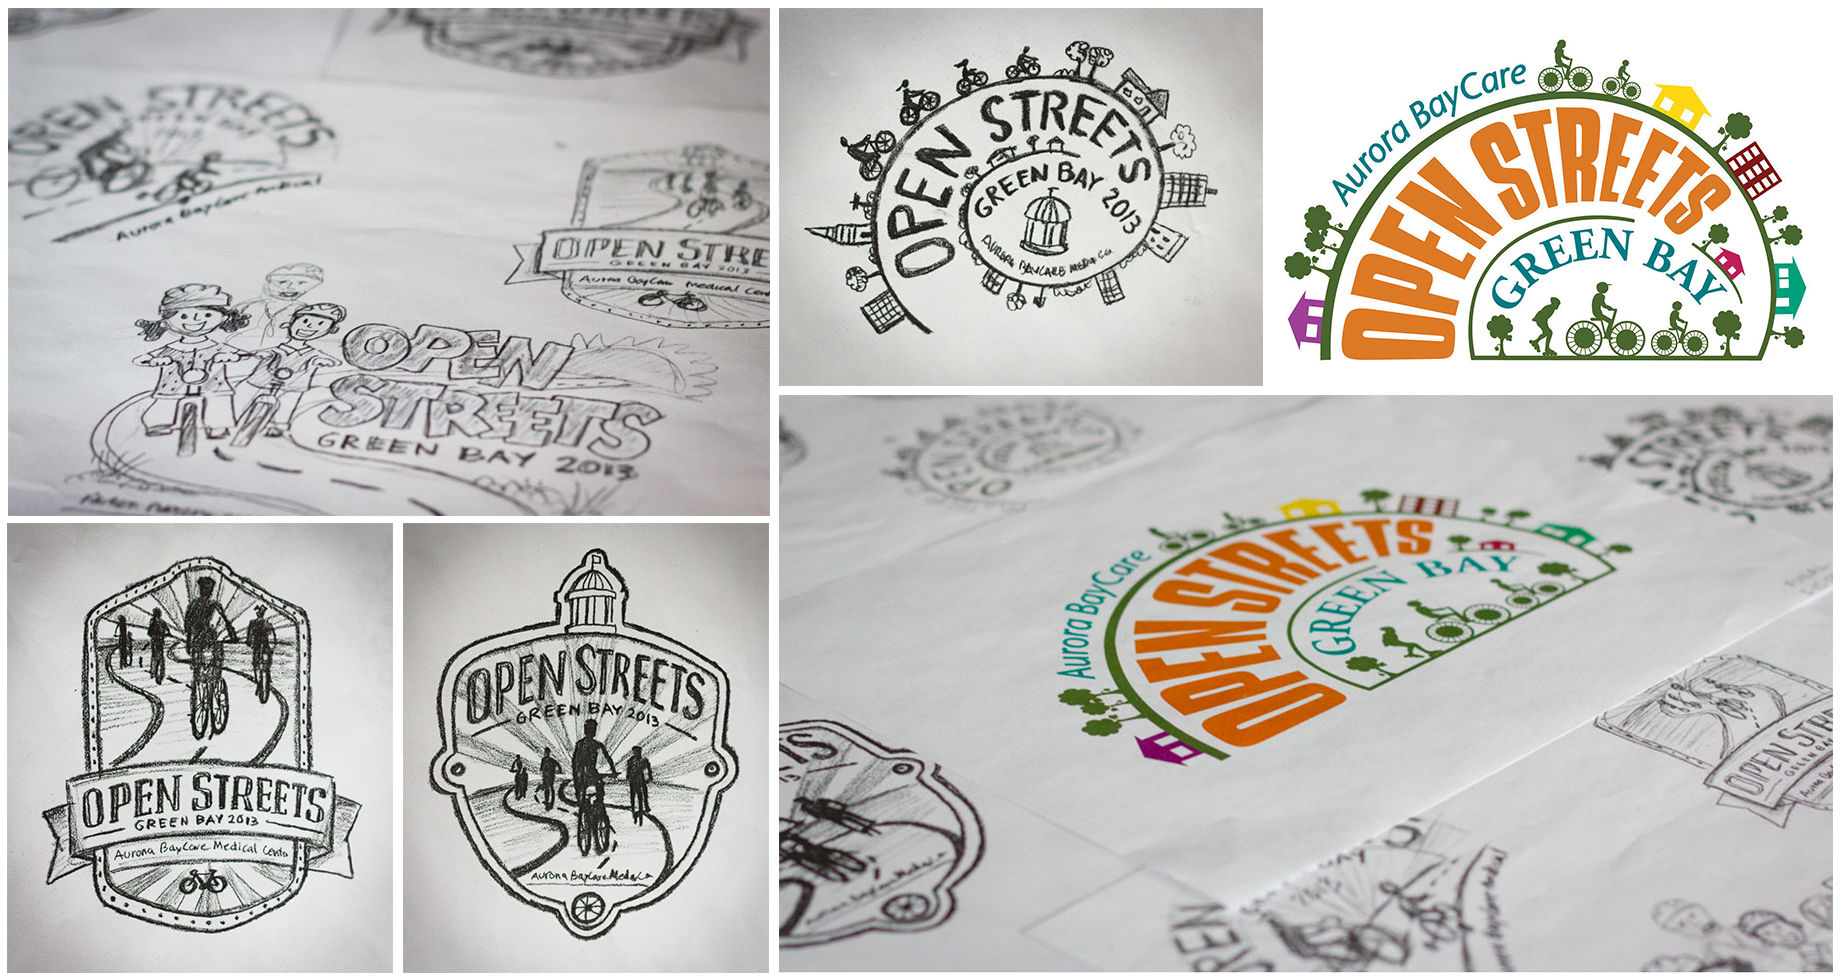 Open Streets logo sketches and final logo side by side